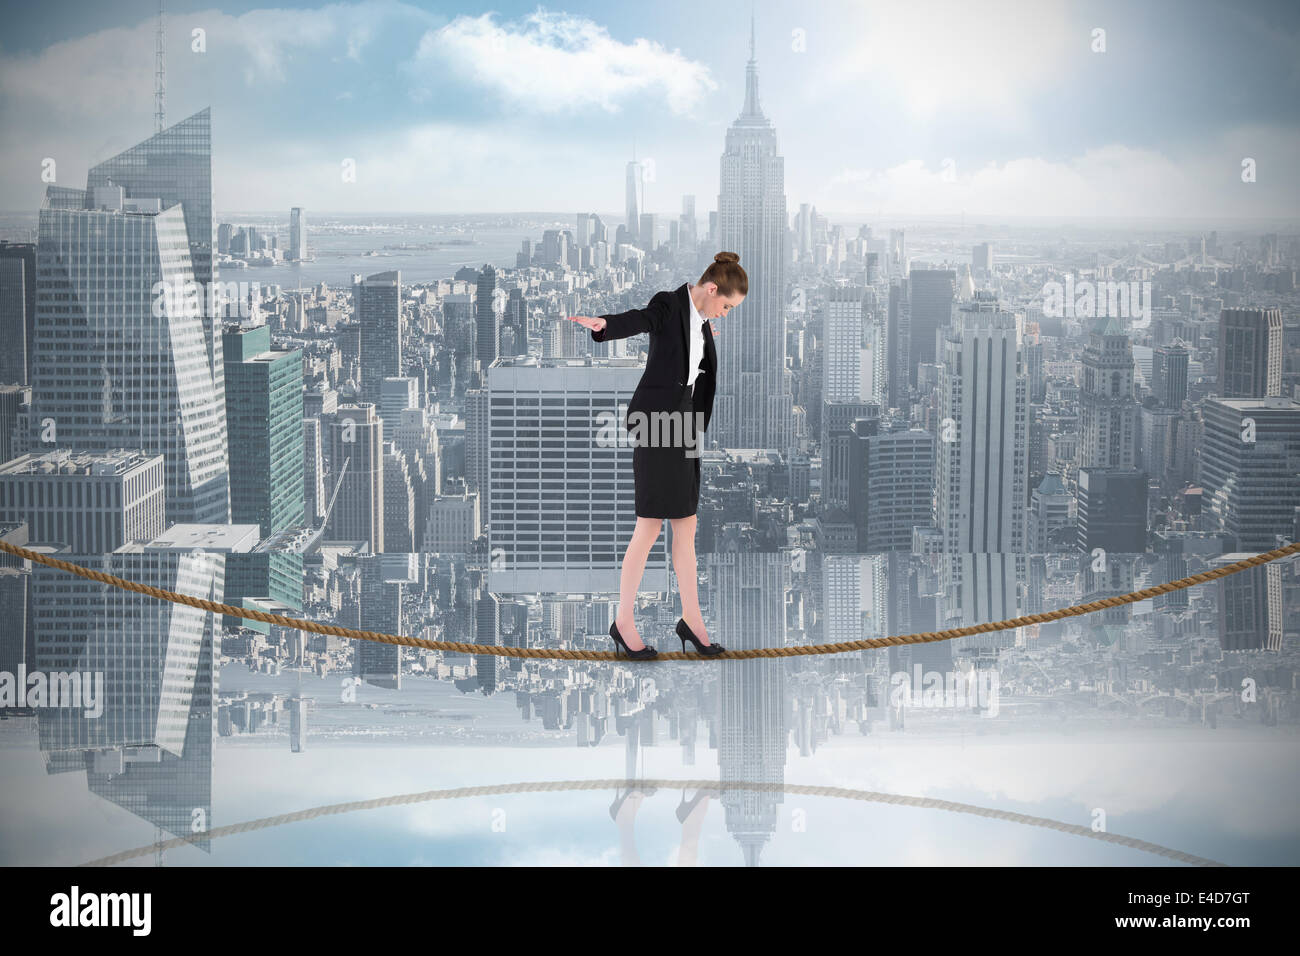 Composite image of businesswoman performing a balancing act on tightrope Stock Photo